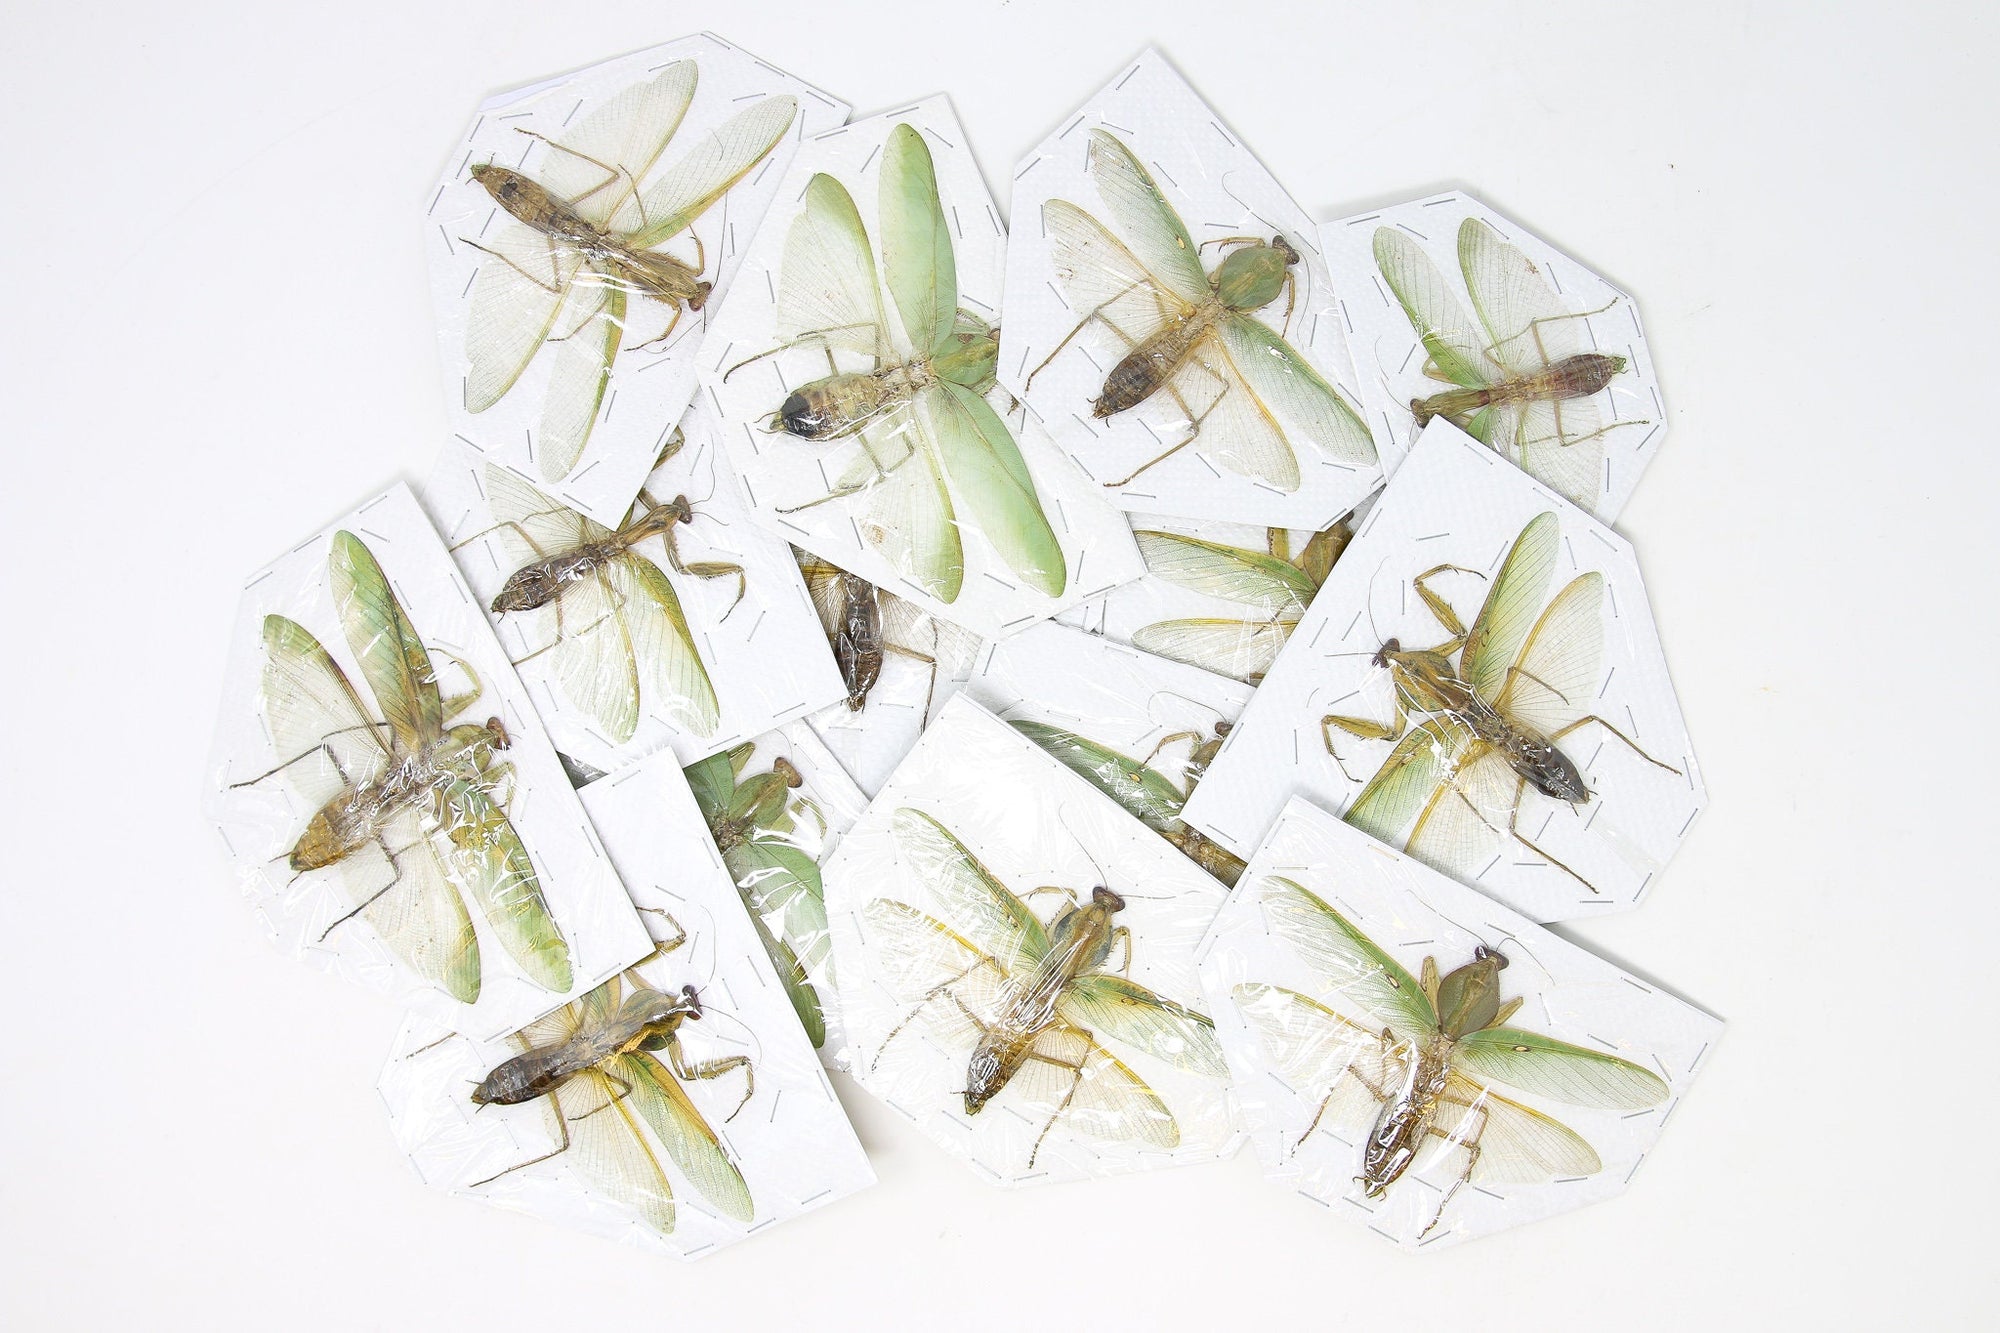 ONE (1) Giant Shield Praying Mantid Thailand | A1 Dry-Preserved Spread Specimens